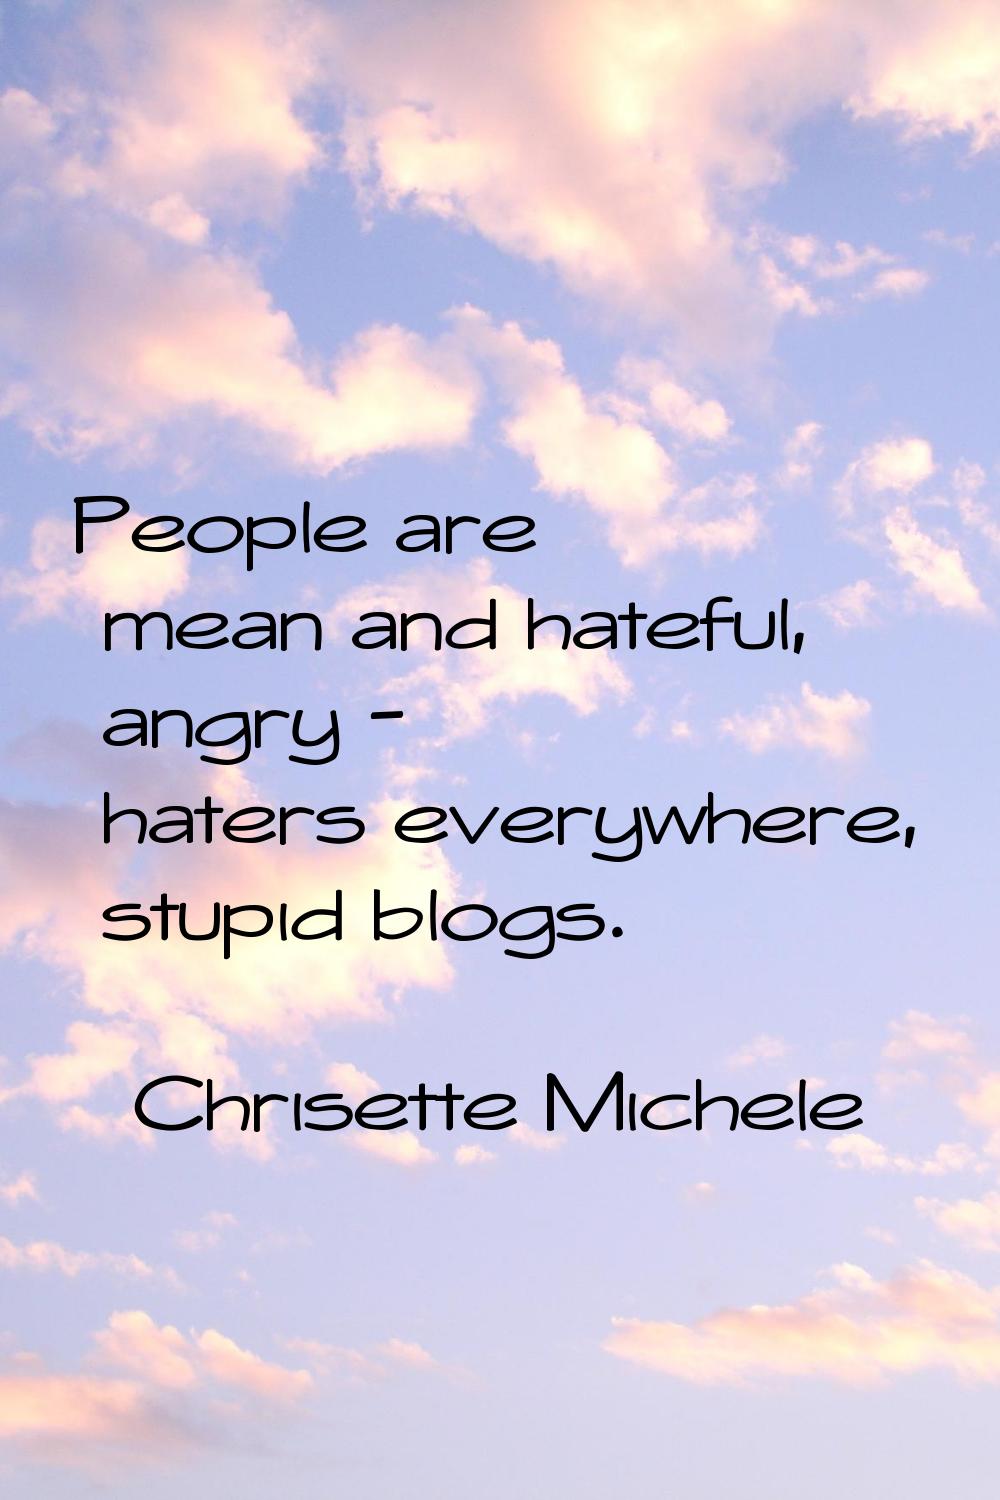 People are mean and hateful, angry - haters everywhere, stupid blogs.